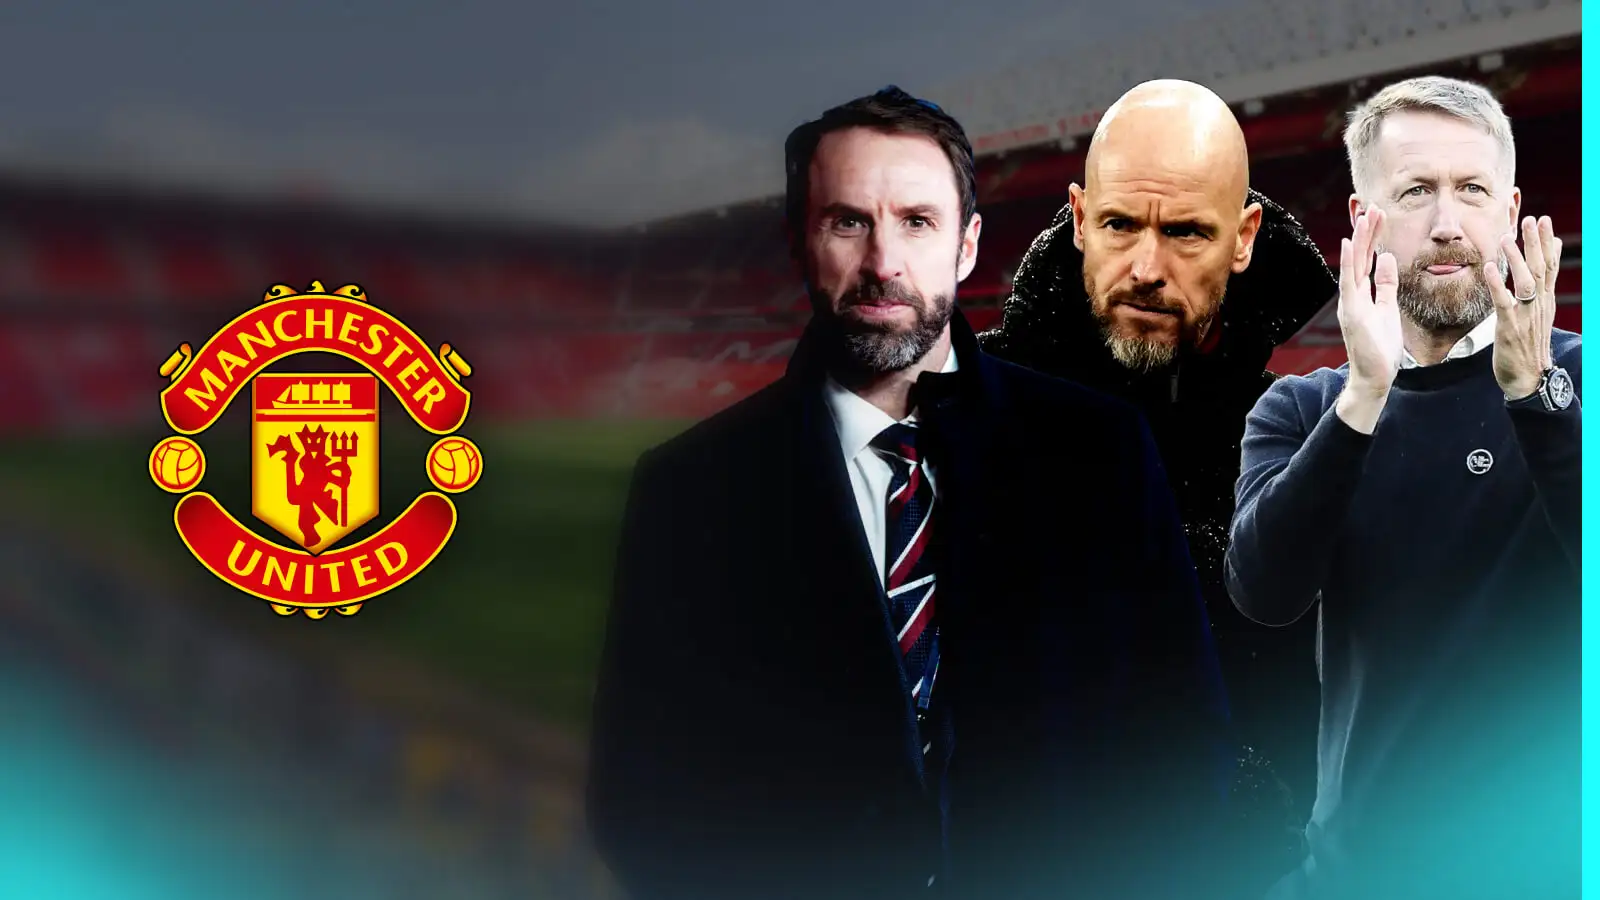 Man Utd: Southgate, Potter appointments doubted amid claims Ratcliffe has ‘decided to fire’ Ten Hag